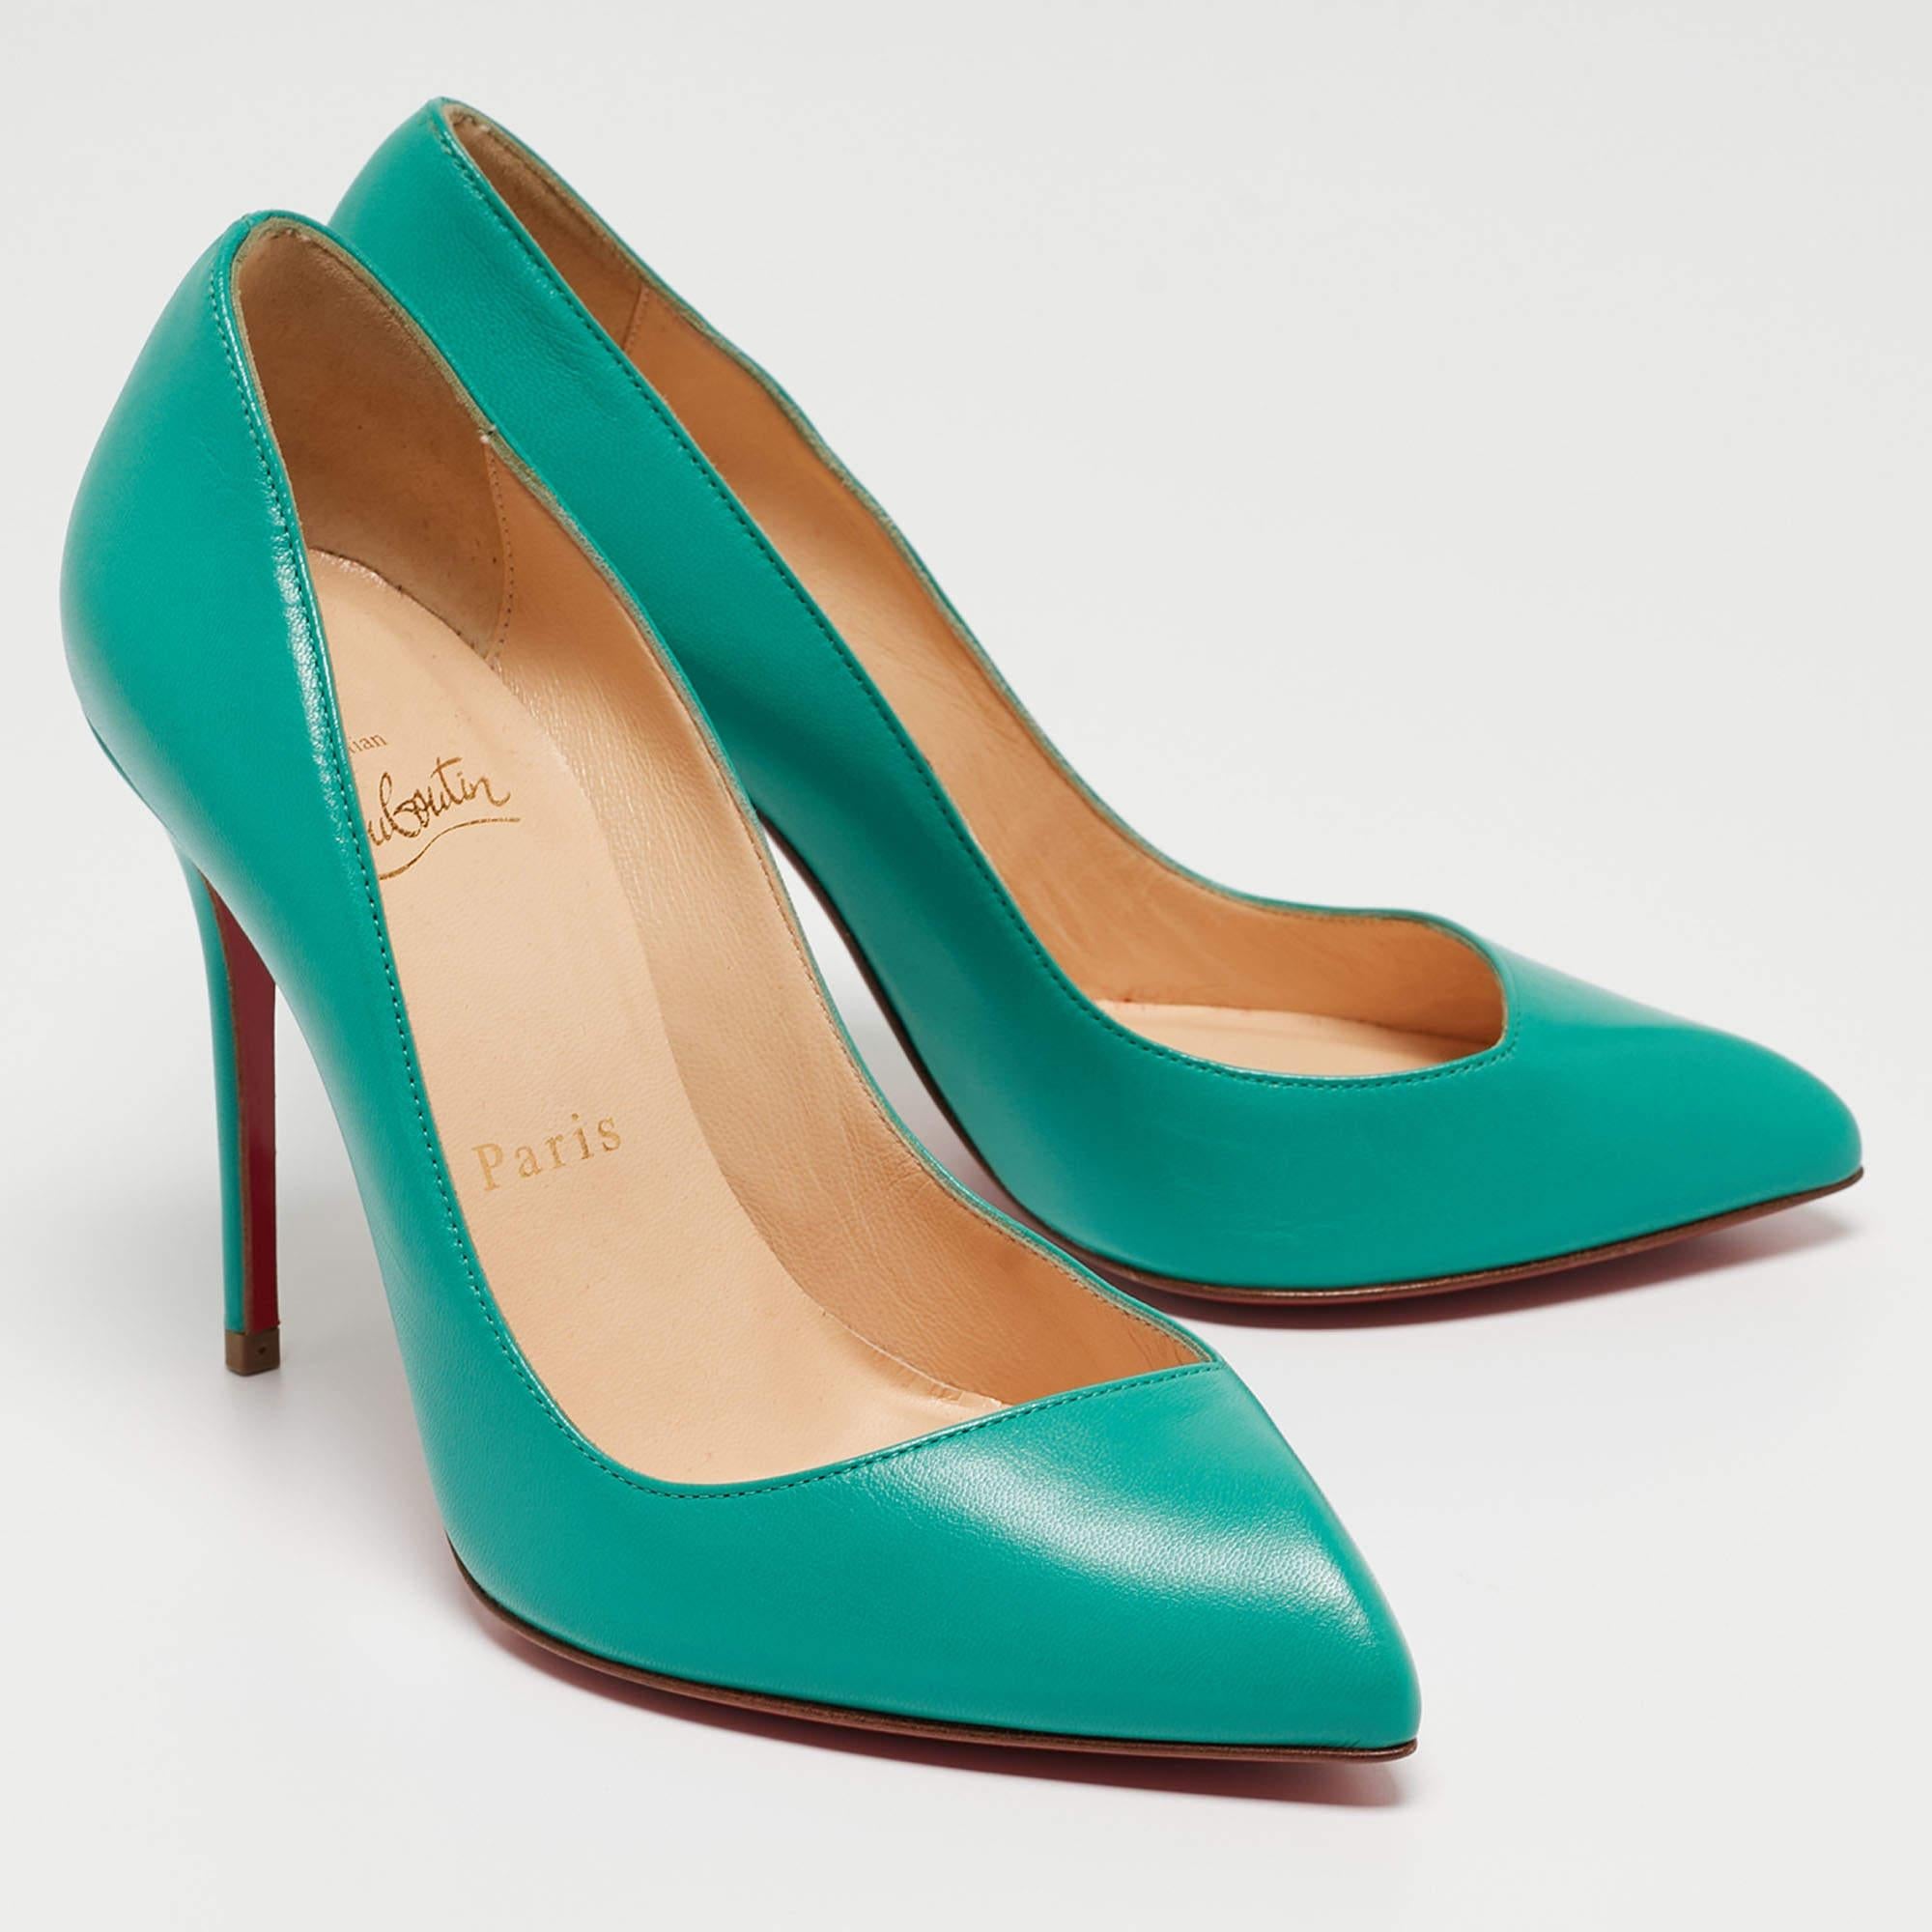 Christian Louboutin Green Leather Corneille Pumps Size 35 1